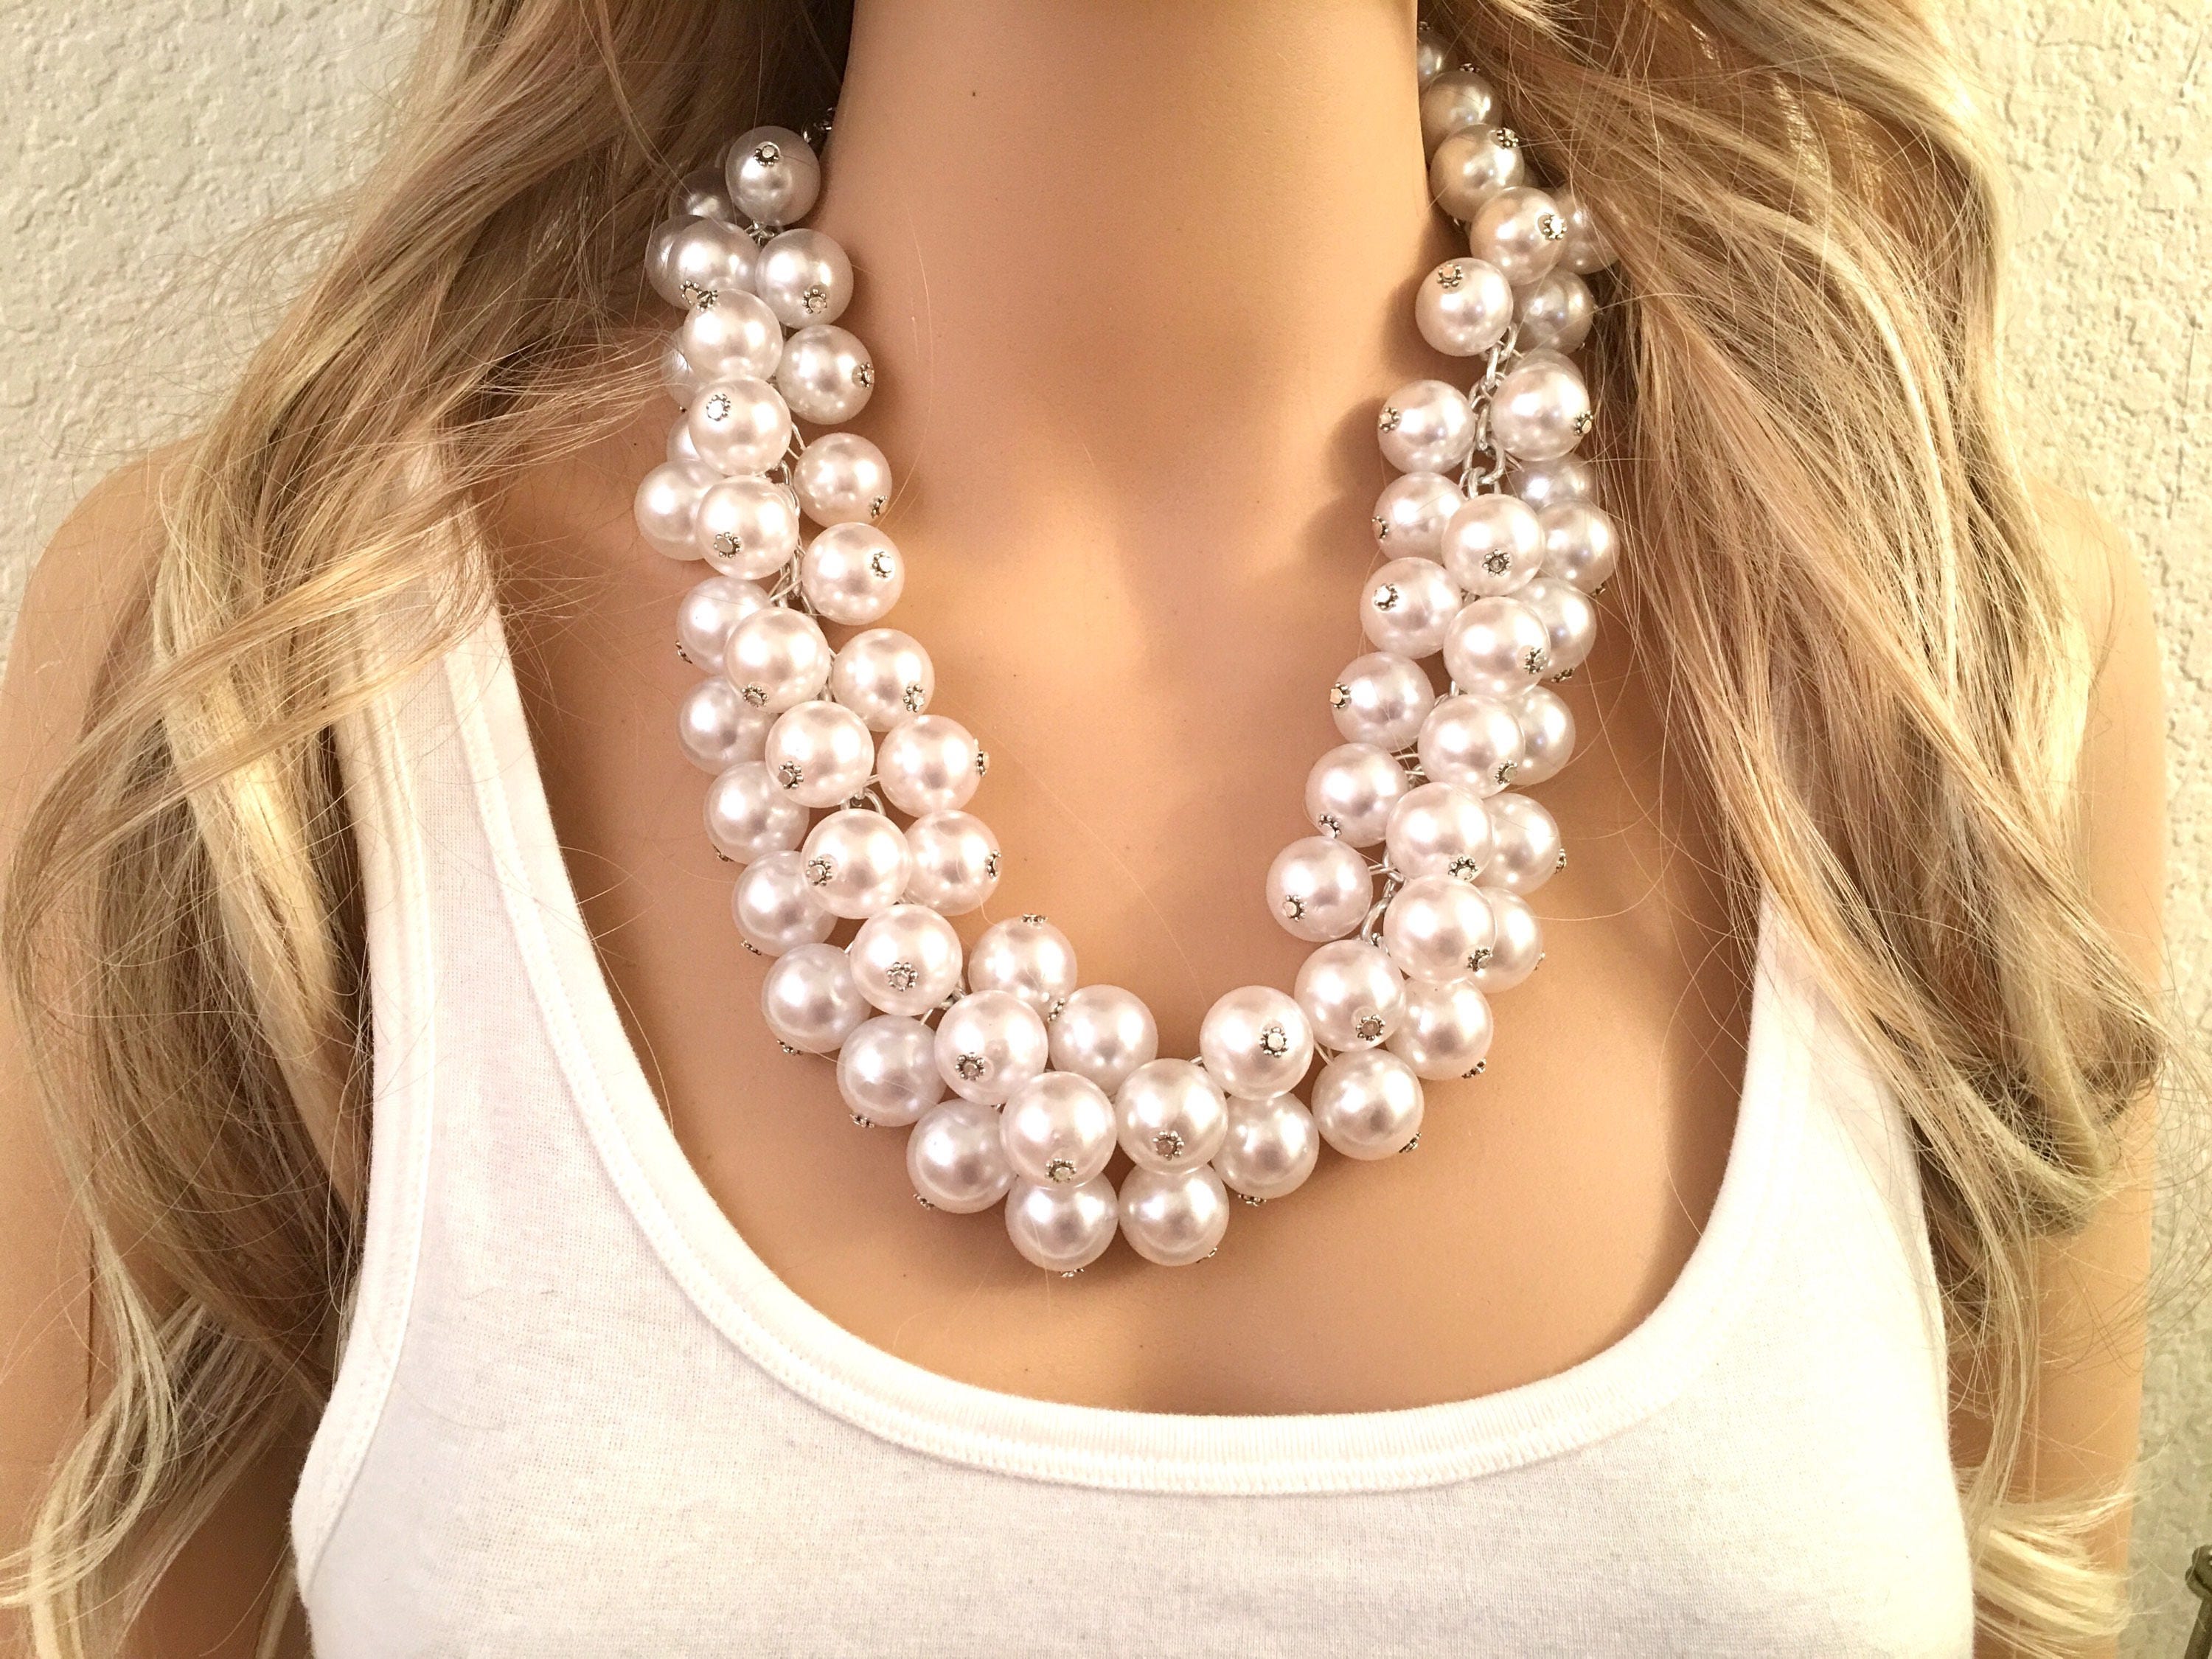 Large Pearl Extra Chunky Statement Necklace - White Necklace for Wedding, Bridal Necklace, Large Collar Necklace, Bridesmaid Necklace, White